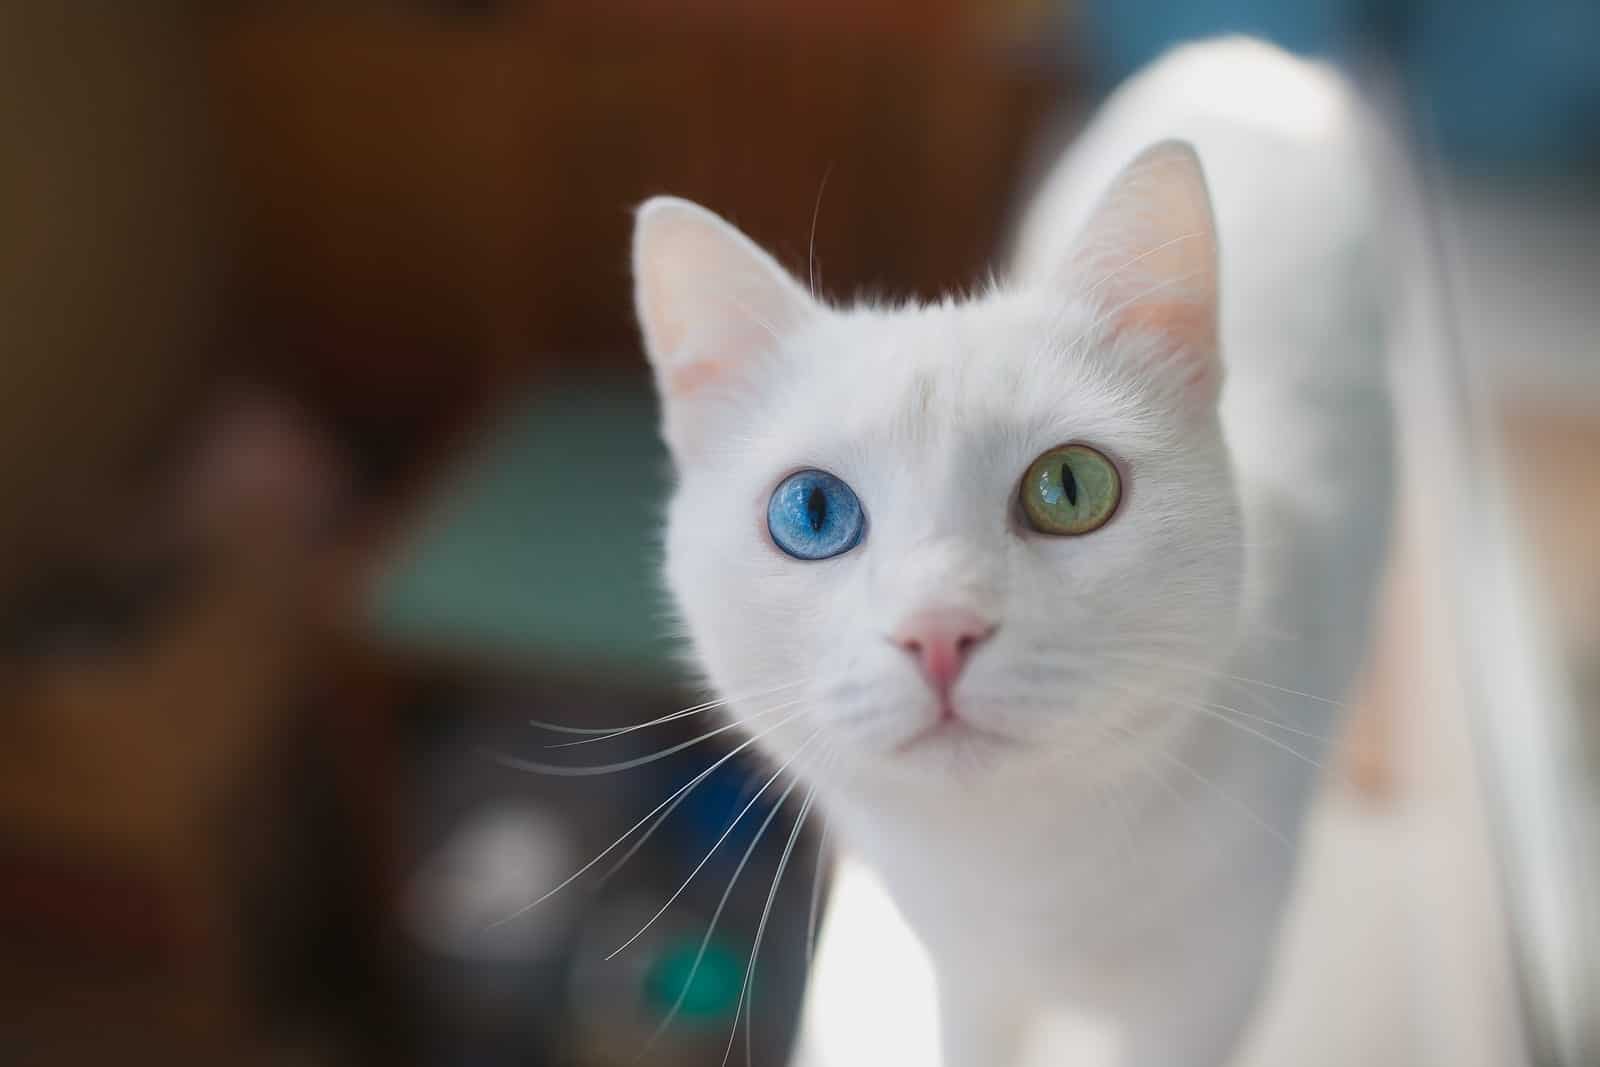 mesmerizing fun facts about cats eye colors cole marmalade